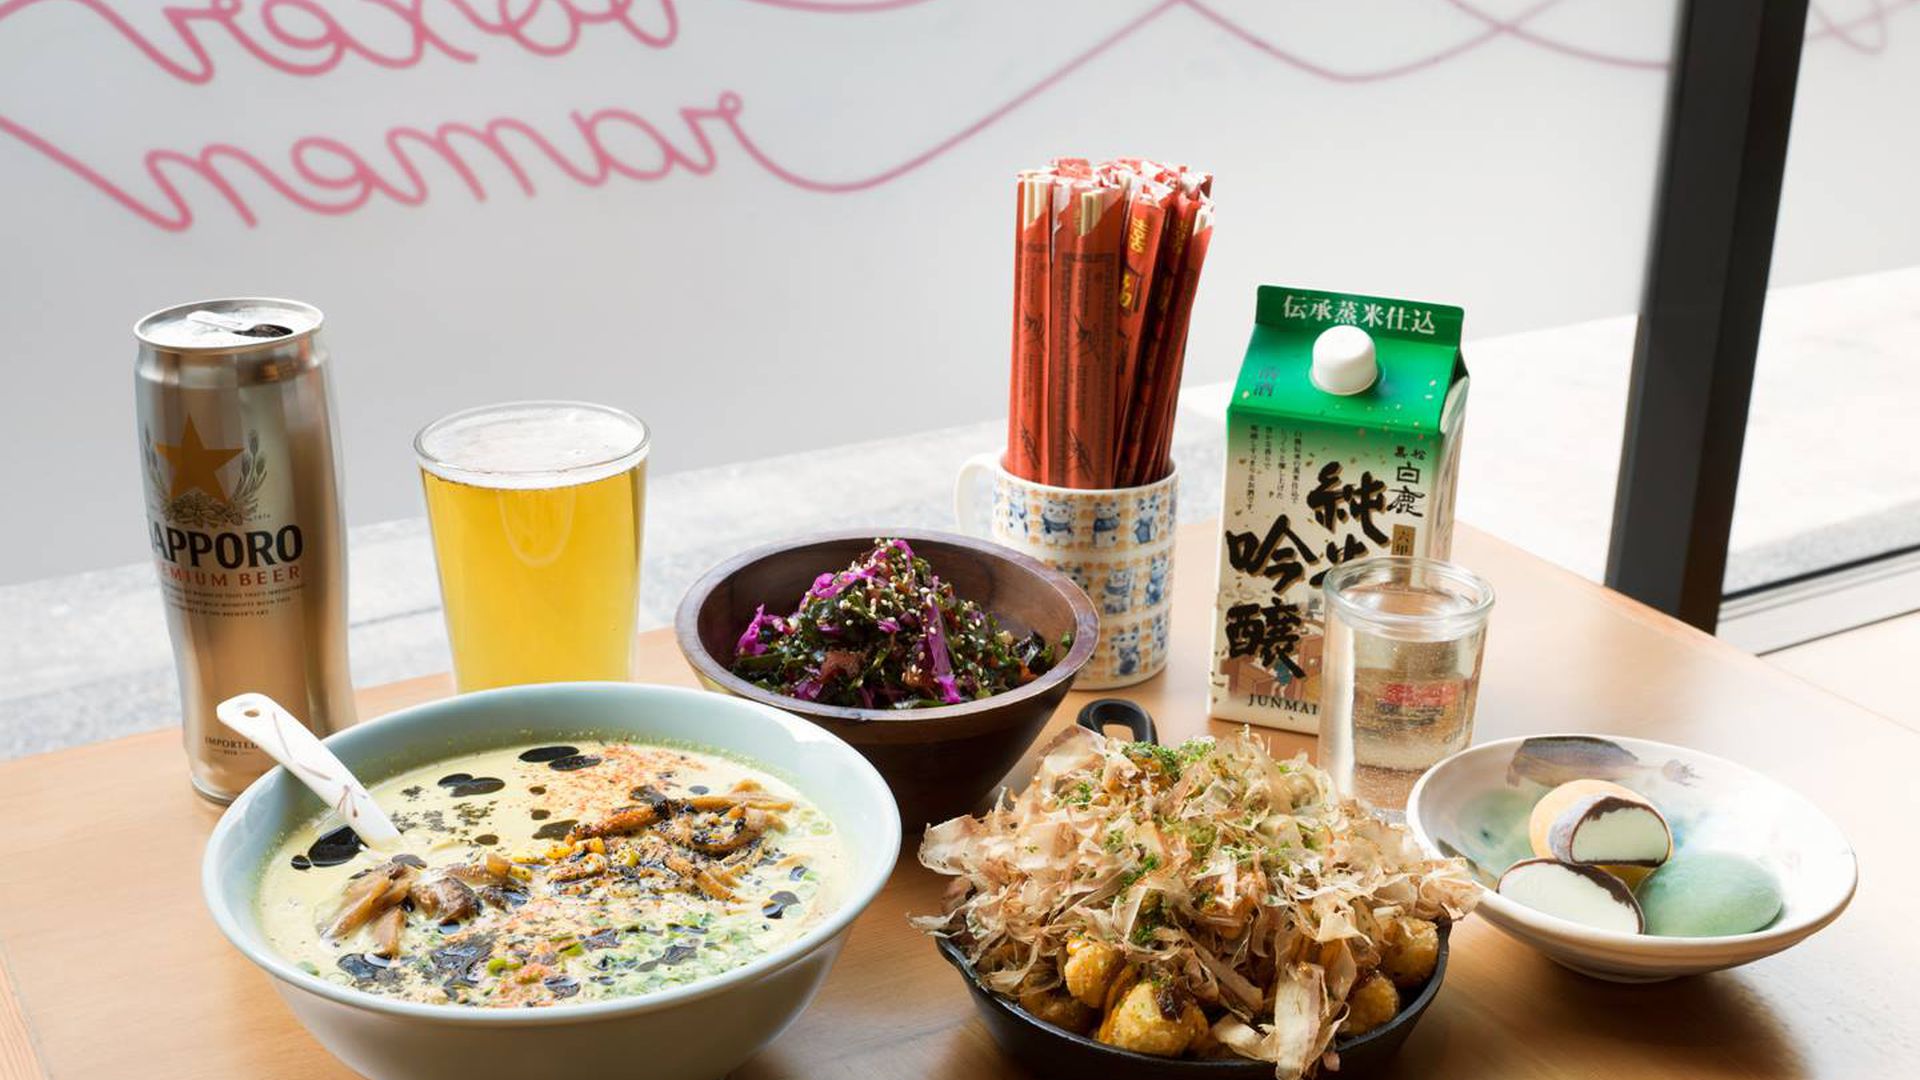 boxer will close all of its portland ramen shops after service this weekend